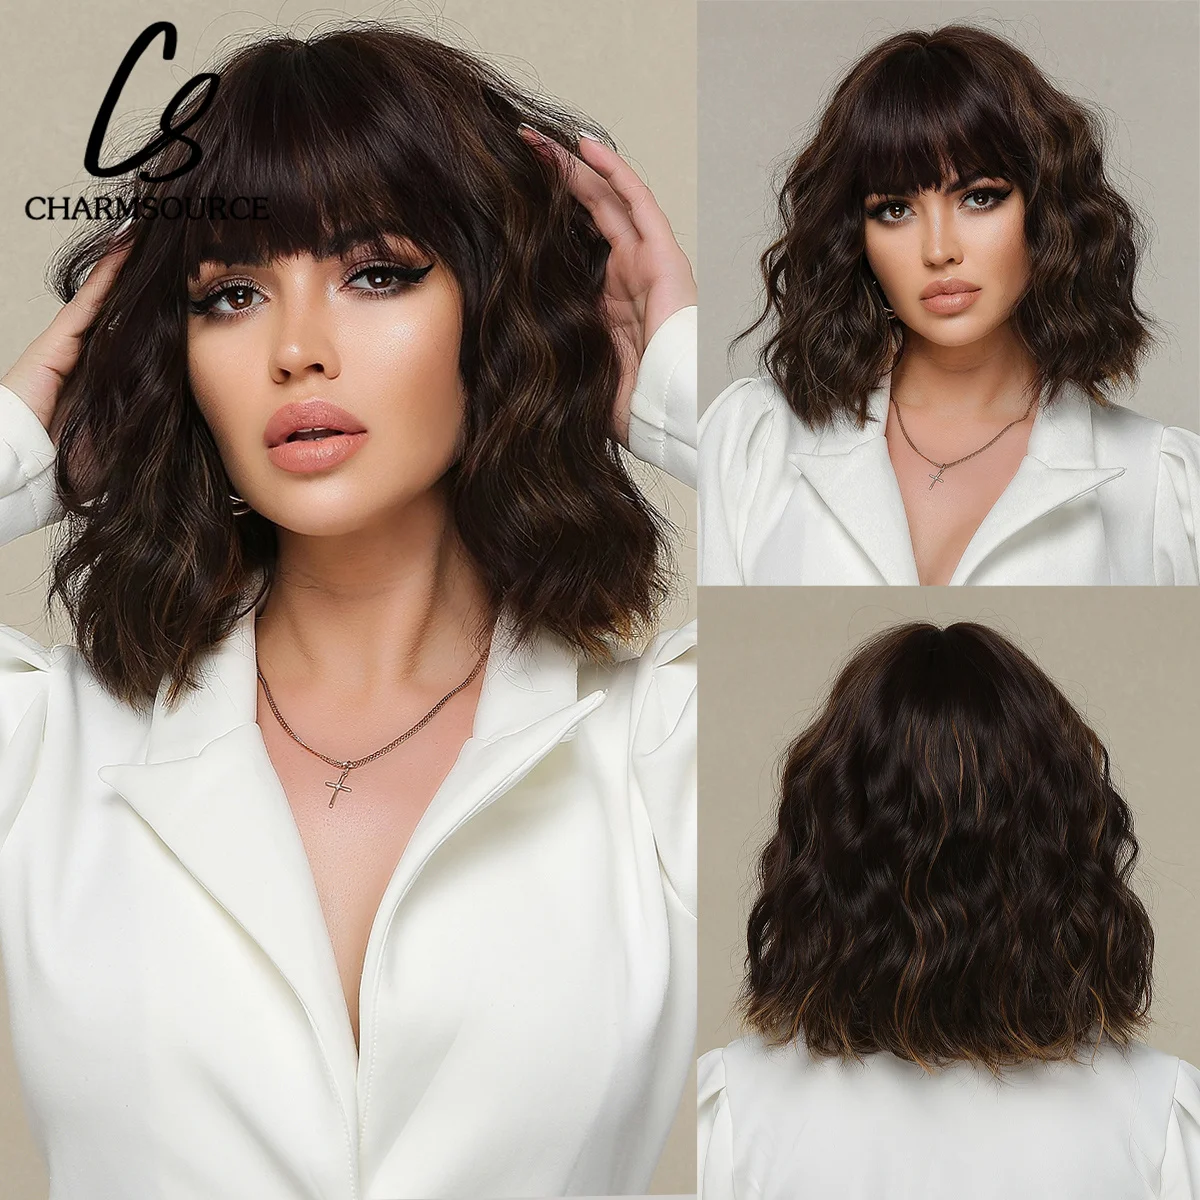 

Bob Wig Natural Wavy Hair with Neat Bangs/Fringe Mixed Black with Brown Curly Wig For Women Synthetic Wigs Daily Party Cosplay